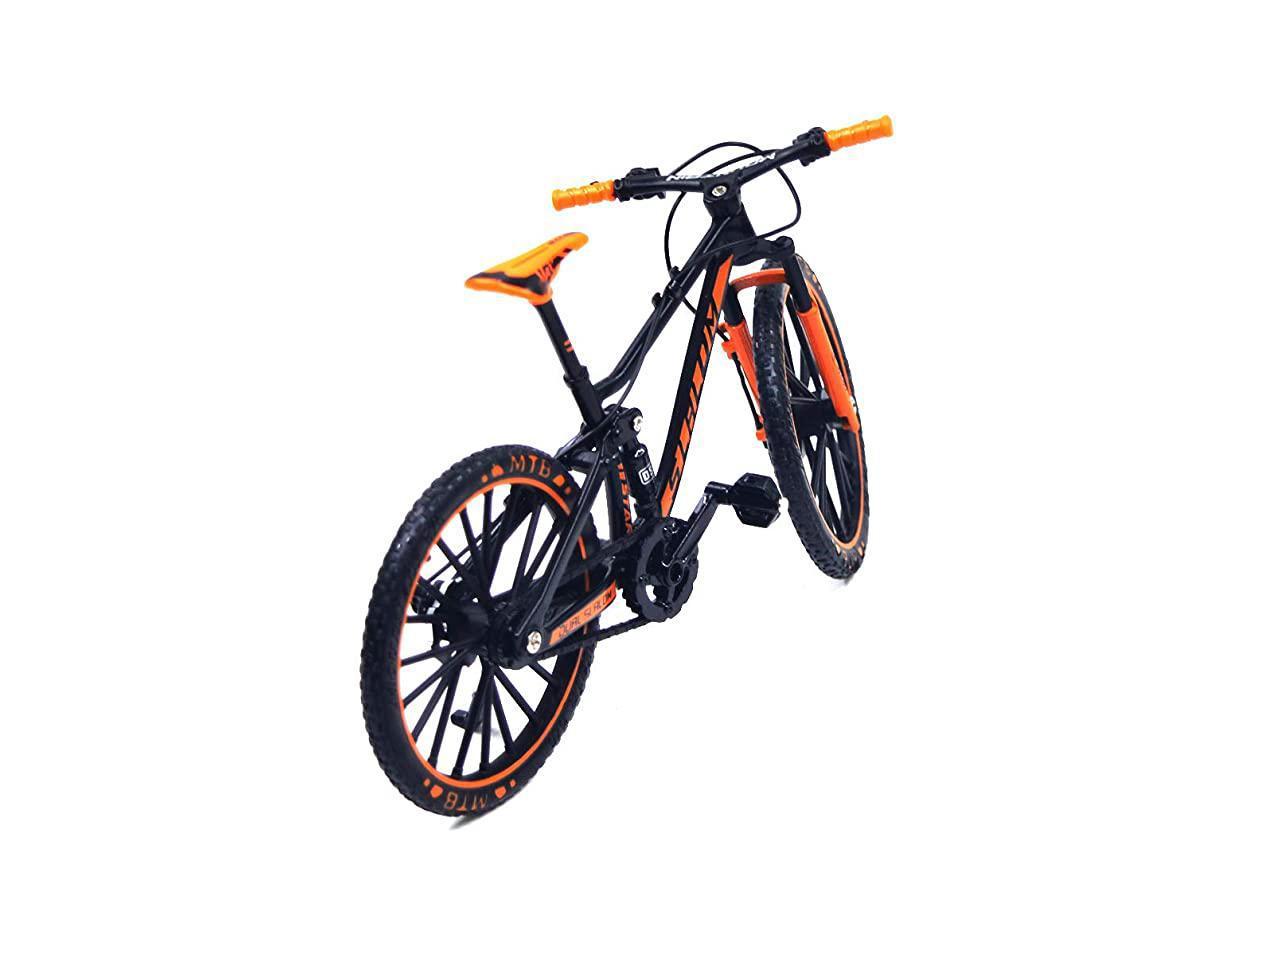 Realistic Bicycle Model for Home/Office Decoration Crafts CHAW Alloy Racing Bicycle Mountain Bike Mini Bicycle Model 